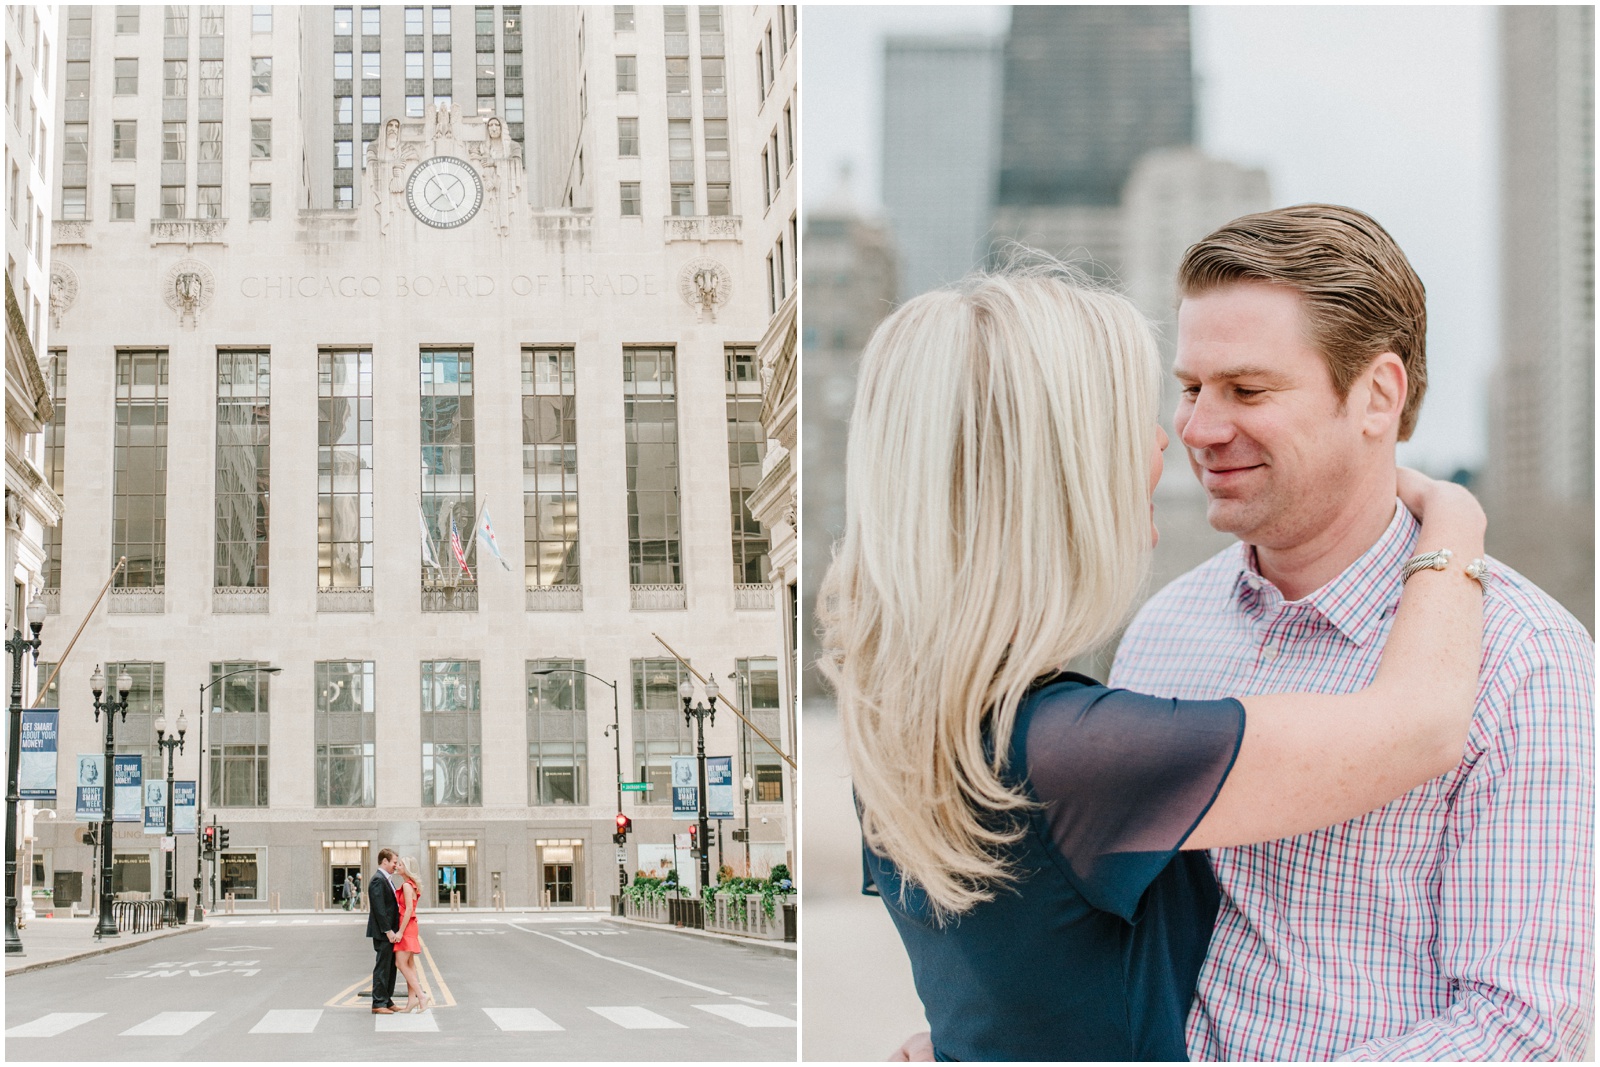 Engagement Session at Chicago Board of Trade